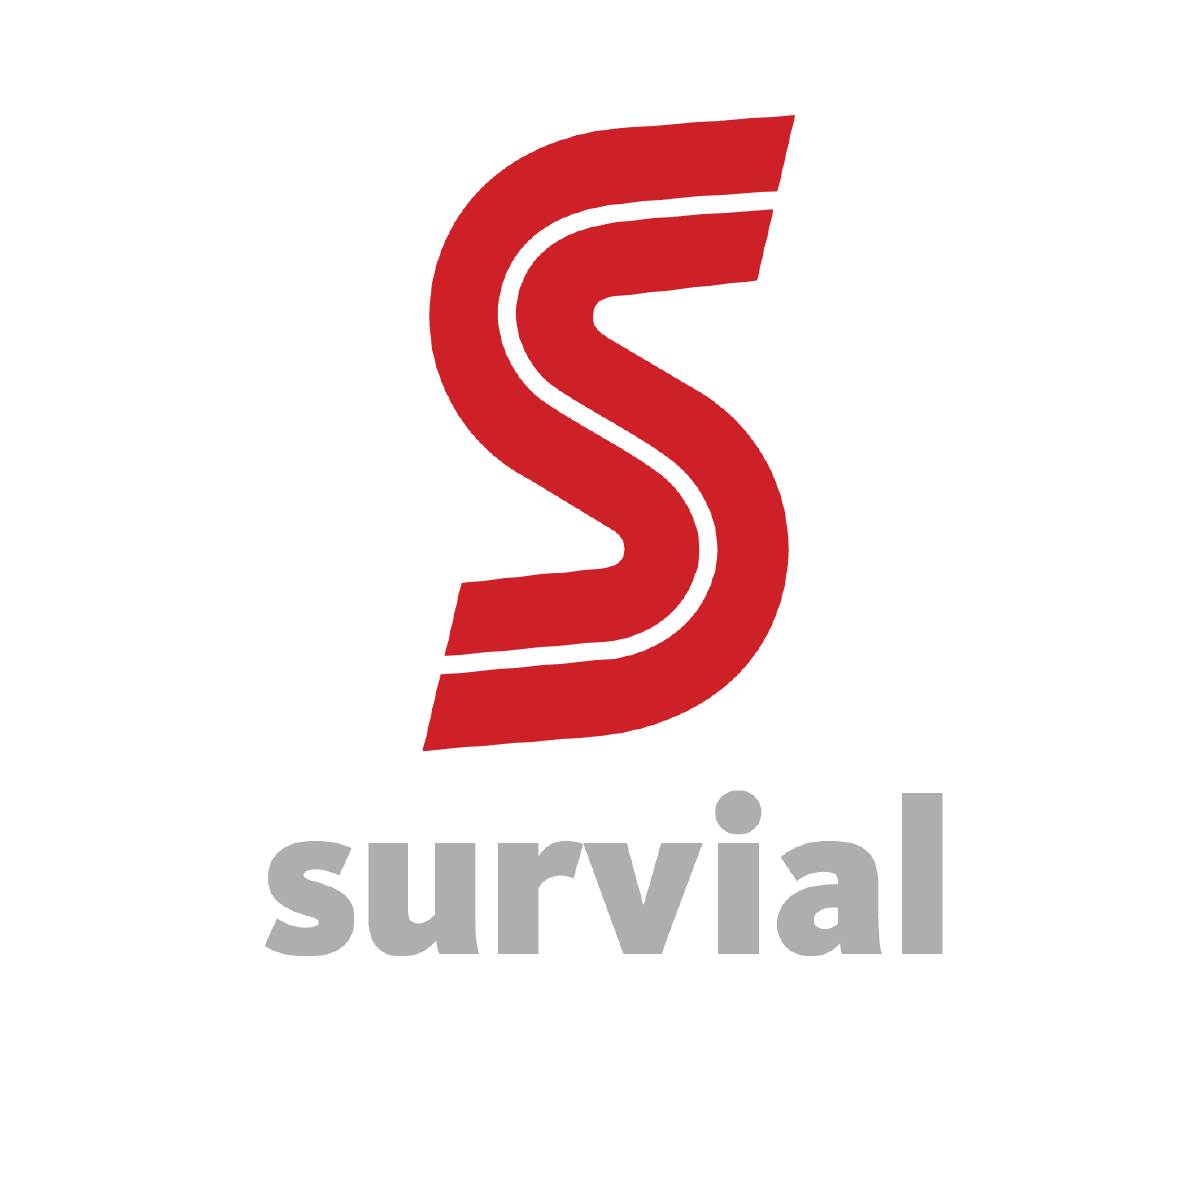 SURVIAL.png  by Christopher96